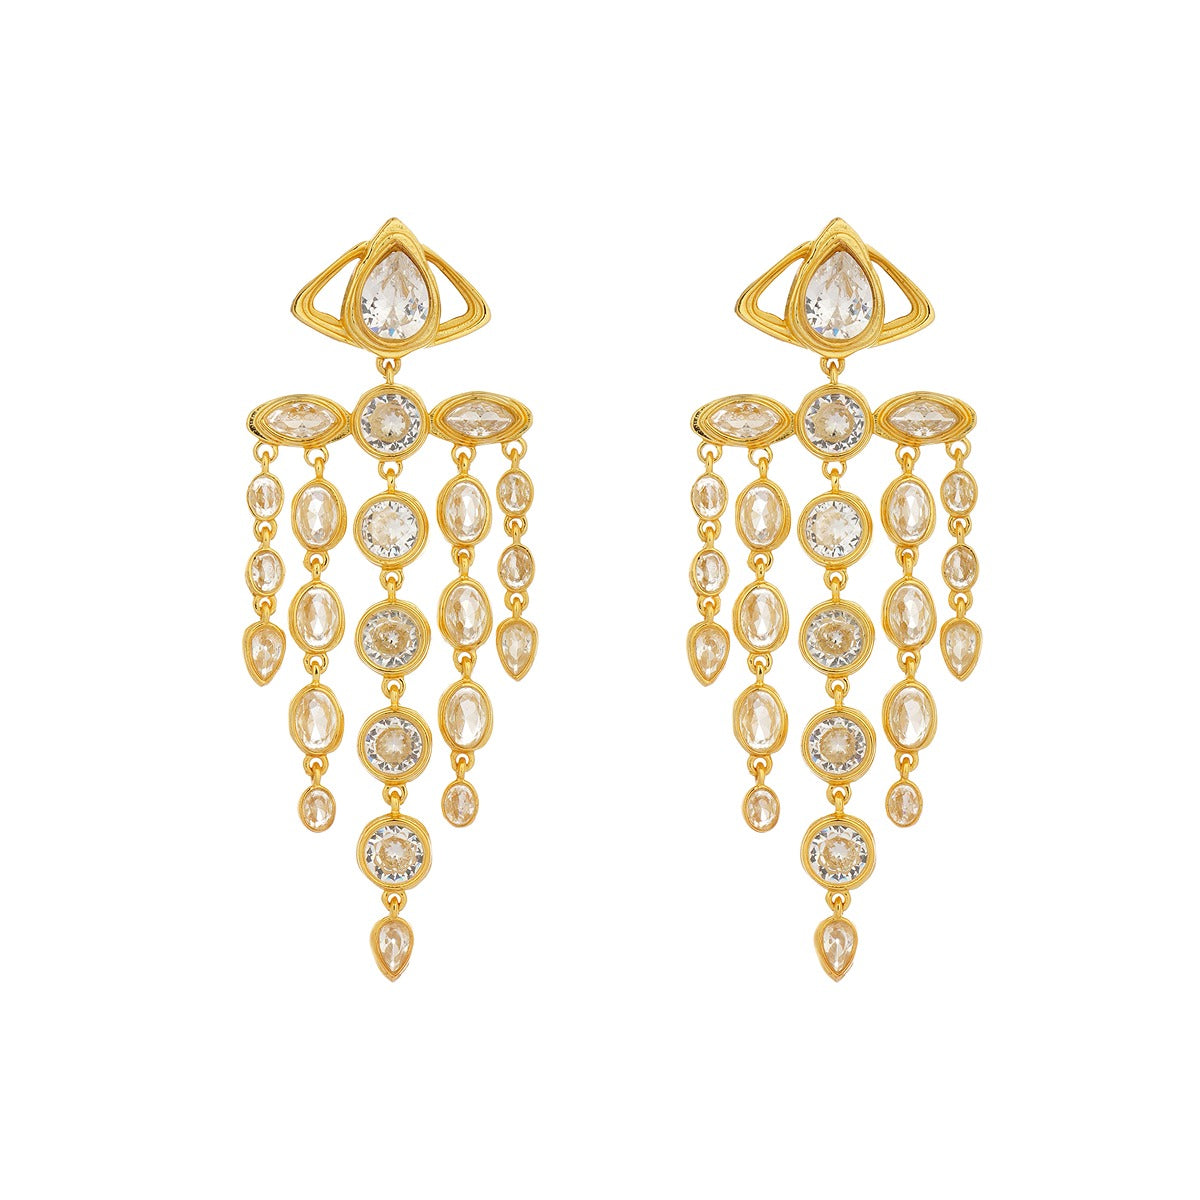 Givenchy Rose Gold Crystal Earrings for Women Online India at Darveys.com